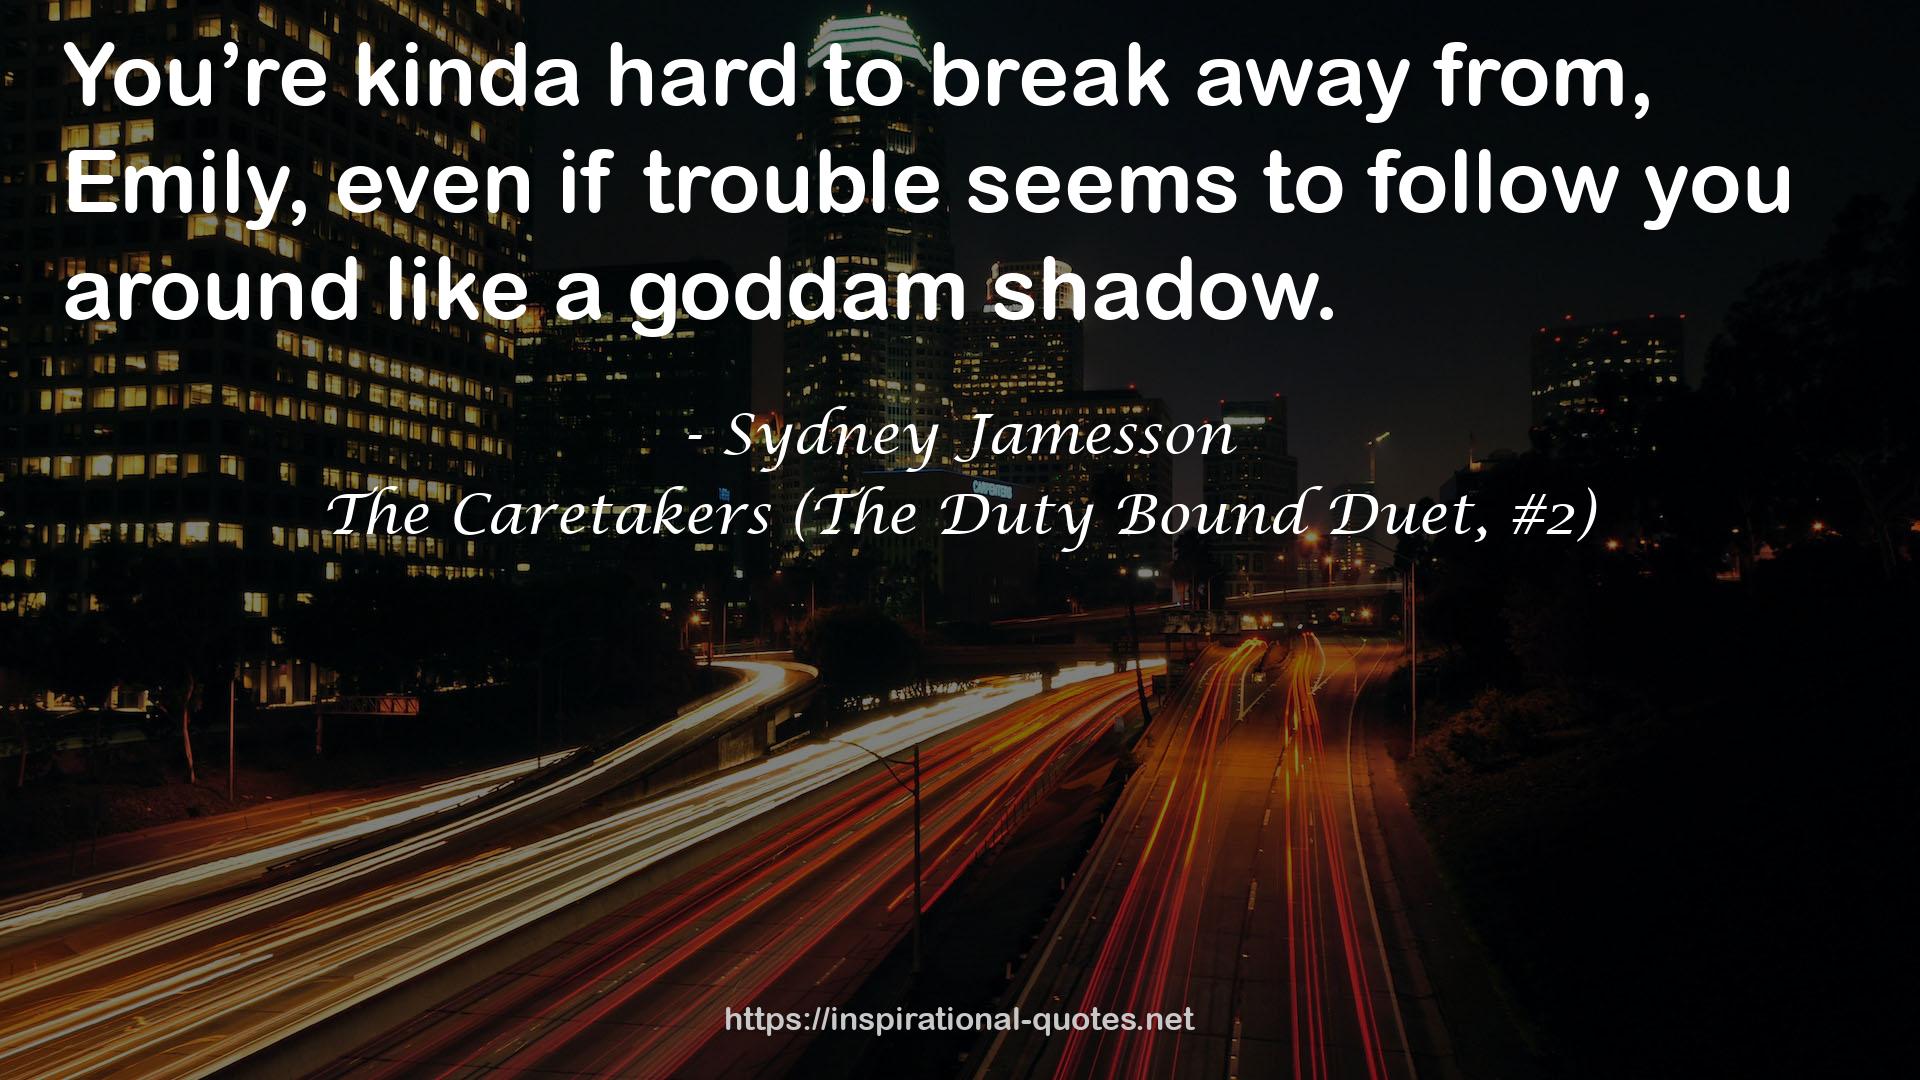 The Caretakers (The Duty Bound Duet, #2) QUOTES